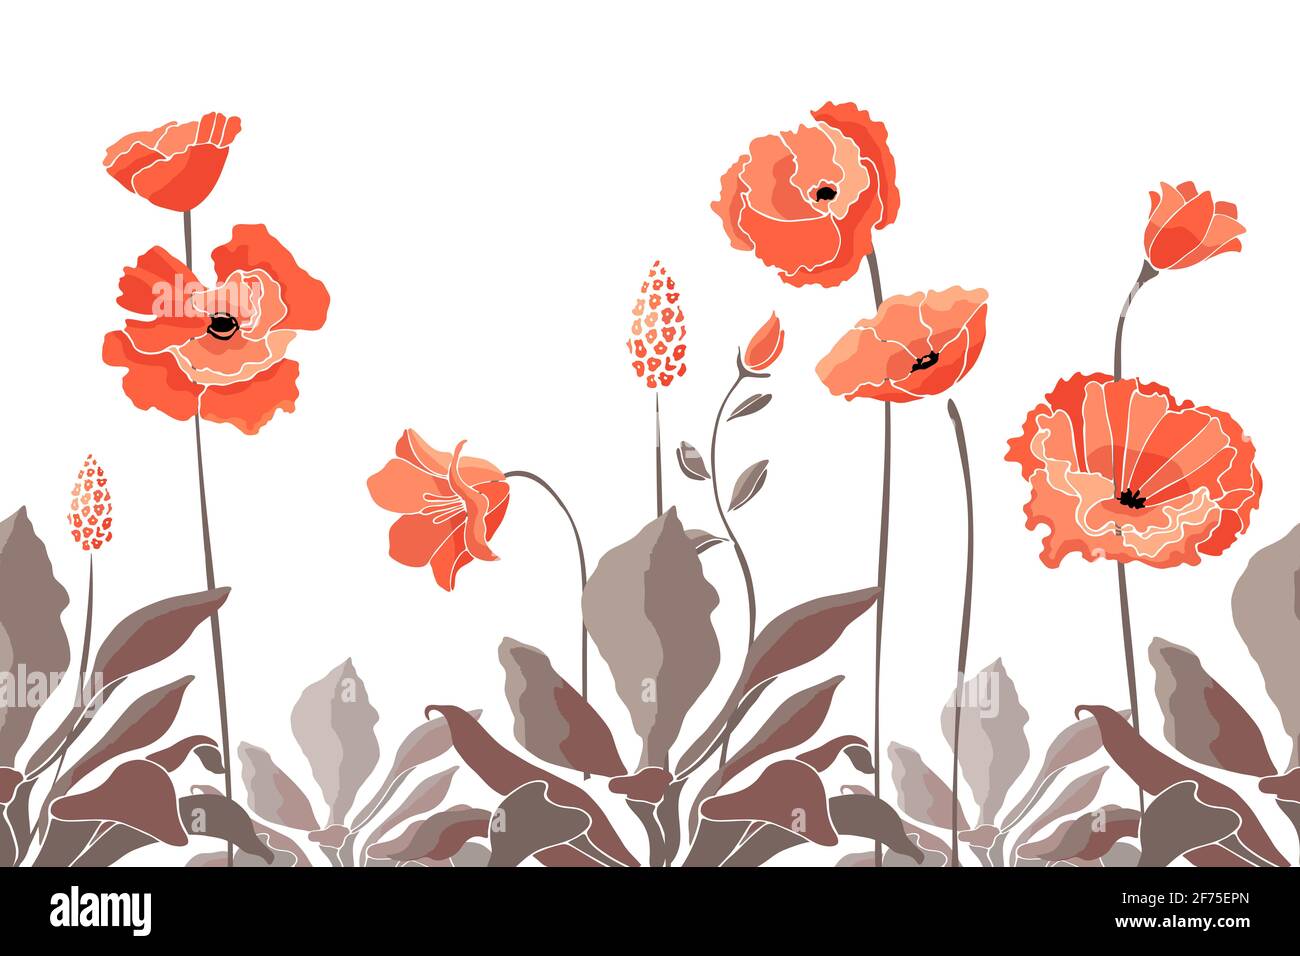 California poppy flowers, Eschscholtzia. Cute pattern with coral color flowers, Chocolate color leaves, and stems. Floral elements isolated. Stock Photo